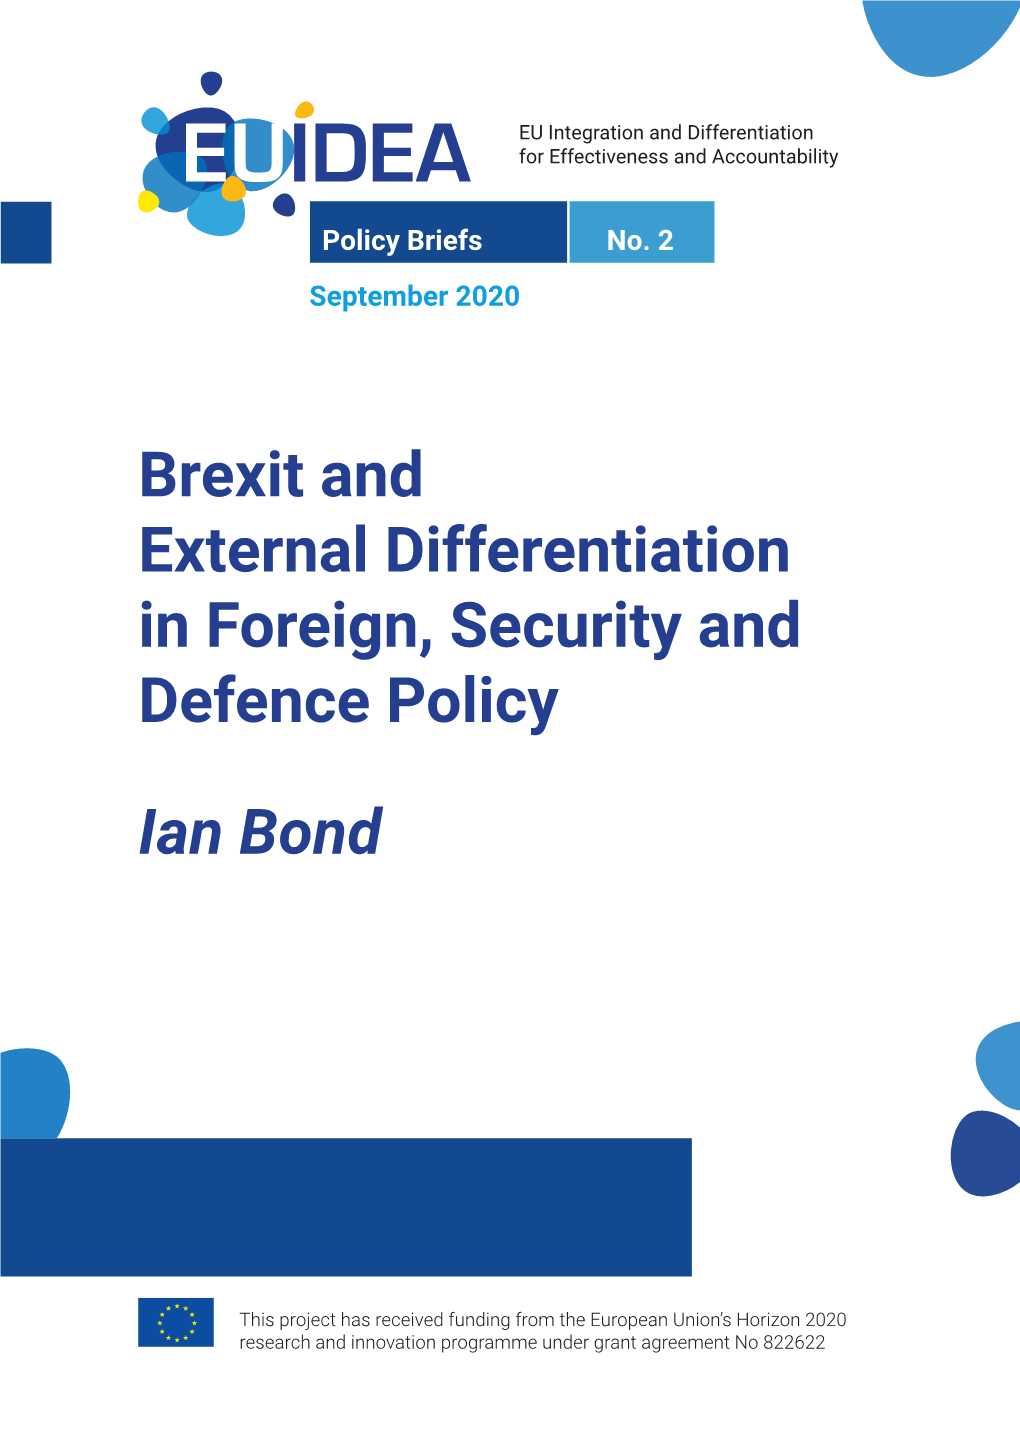 Brexit and External Differentiation in Foreign, Security and Defence Policy